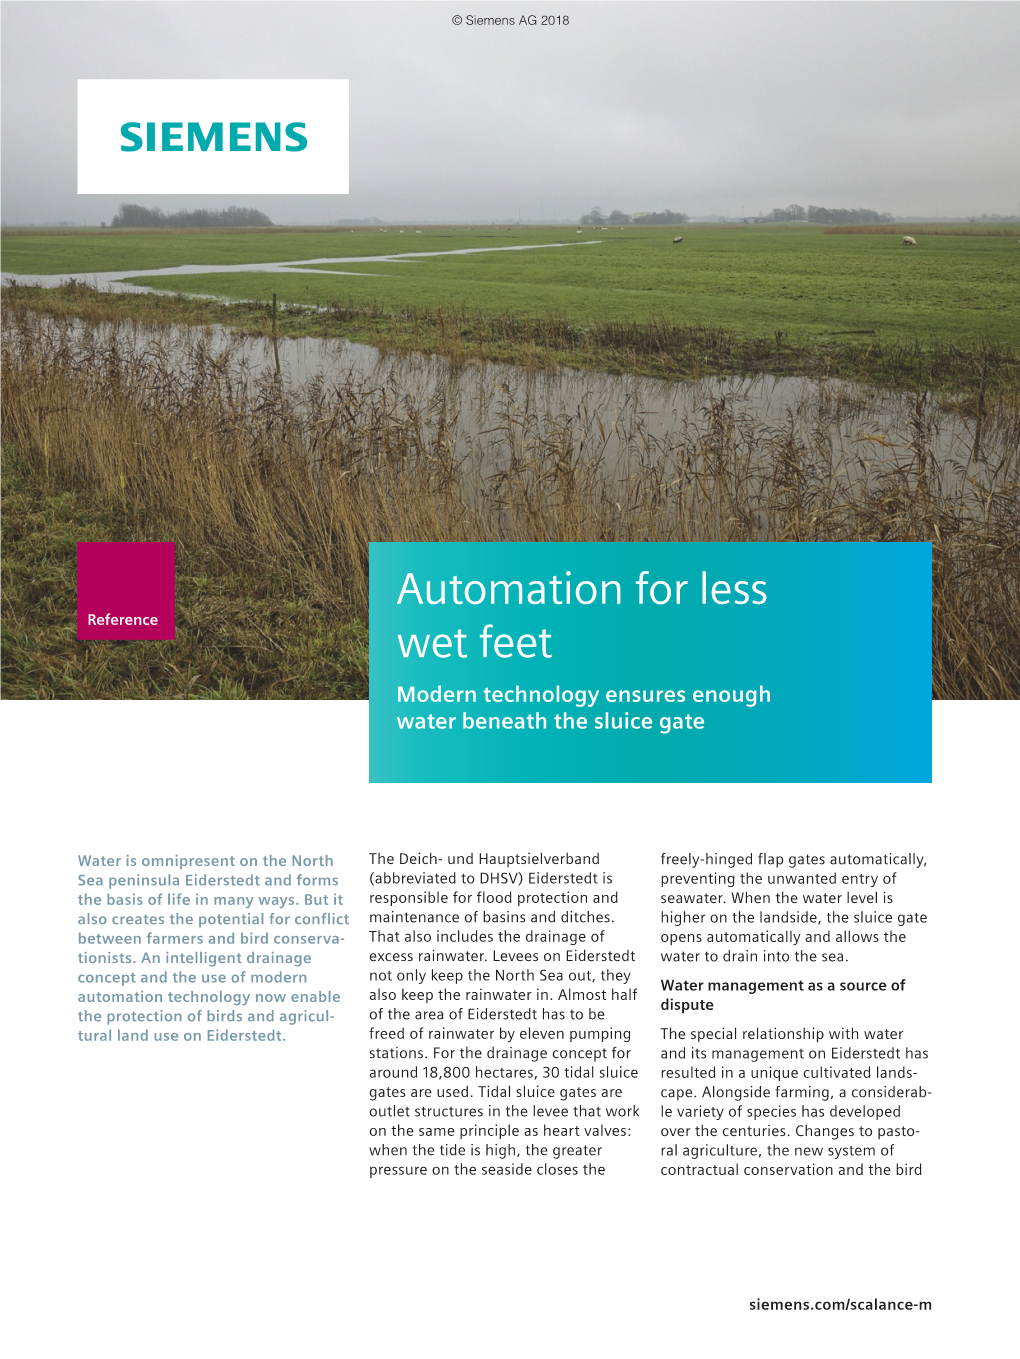 Automation for Less Wet Feed